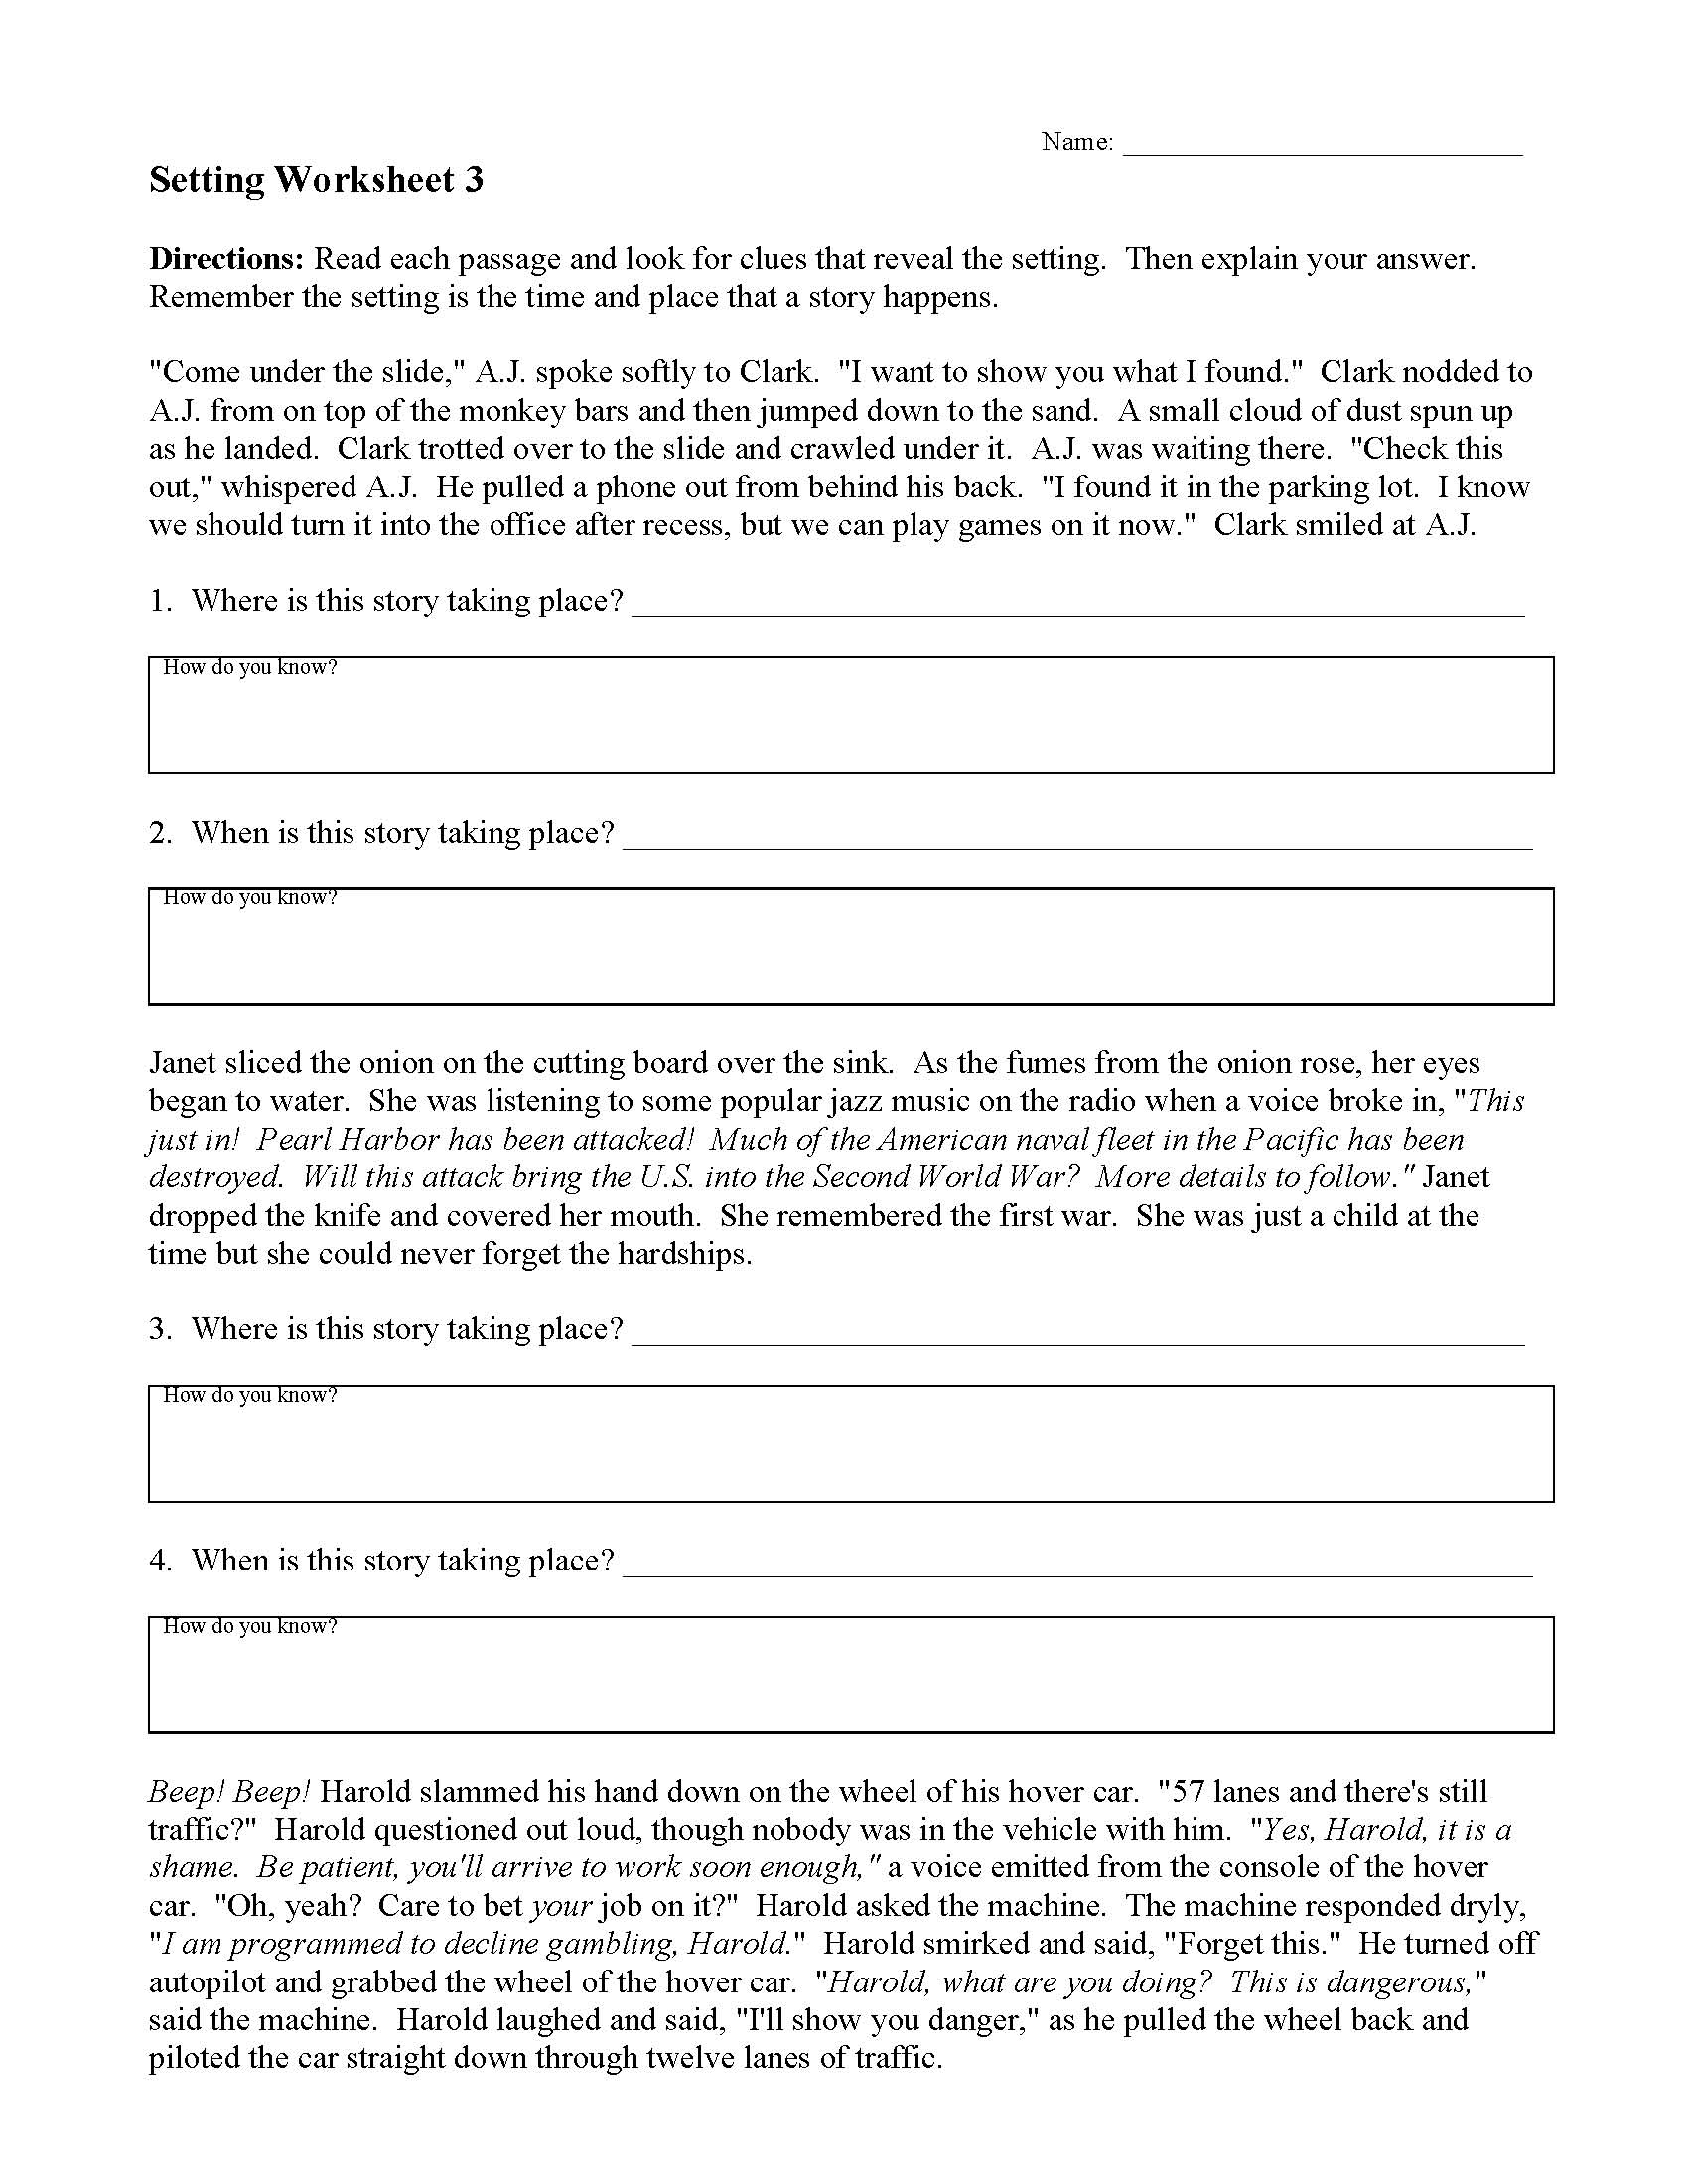 character-and-settings-worksheet-by-teach-simple